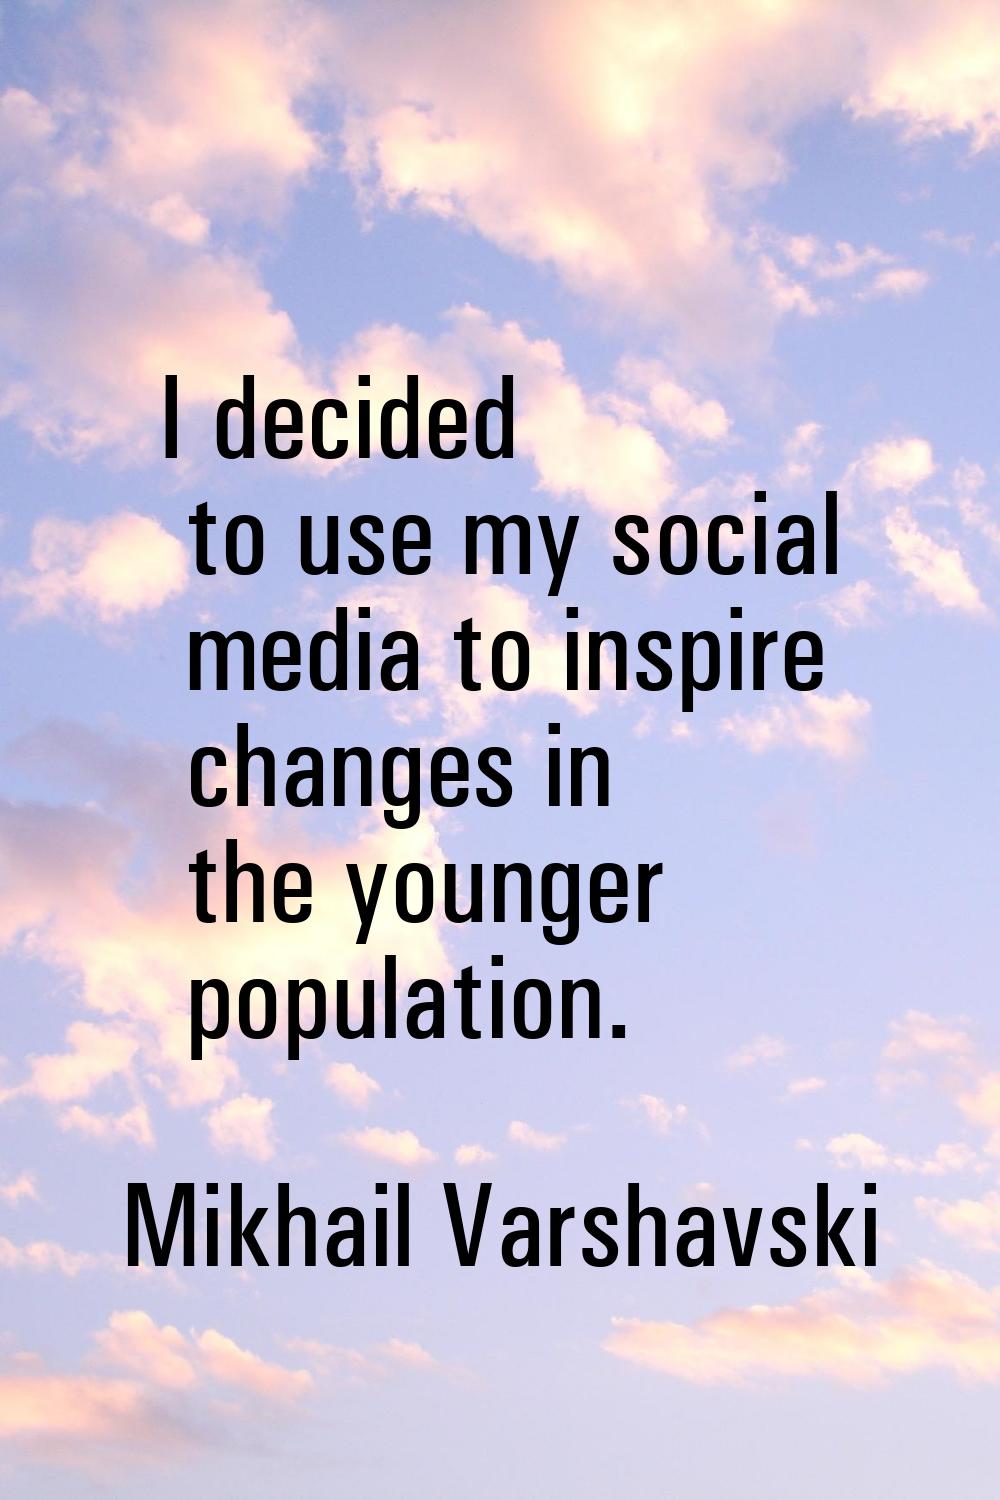 I decided to use my social media to inspire changes in the younger population.